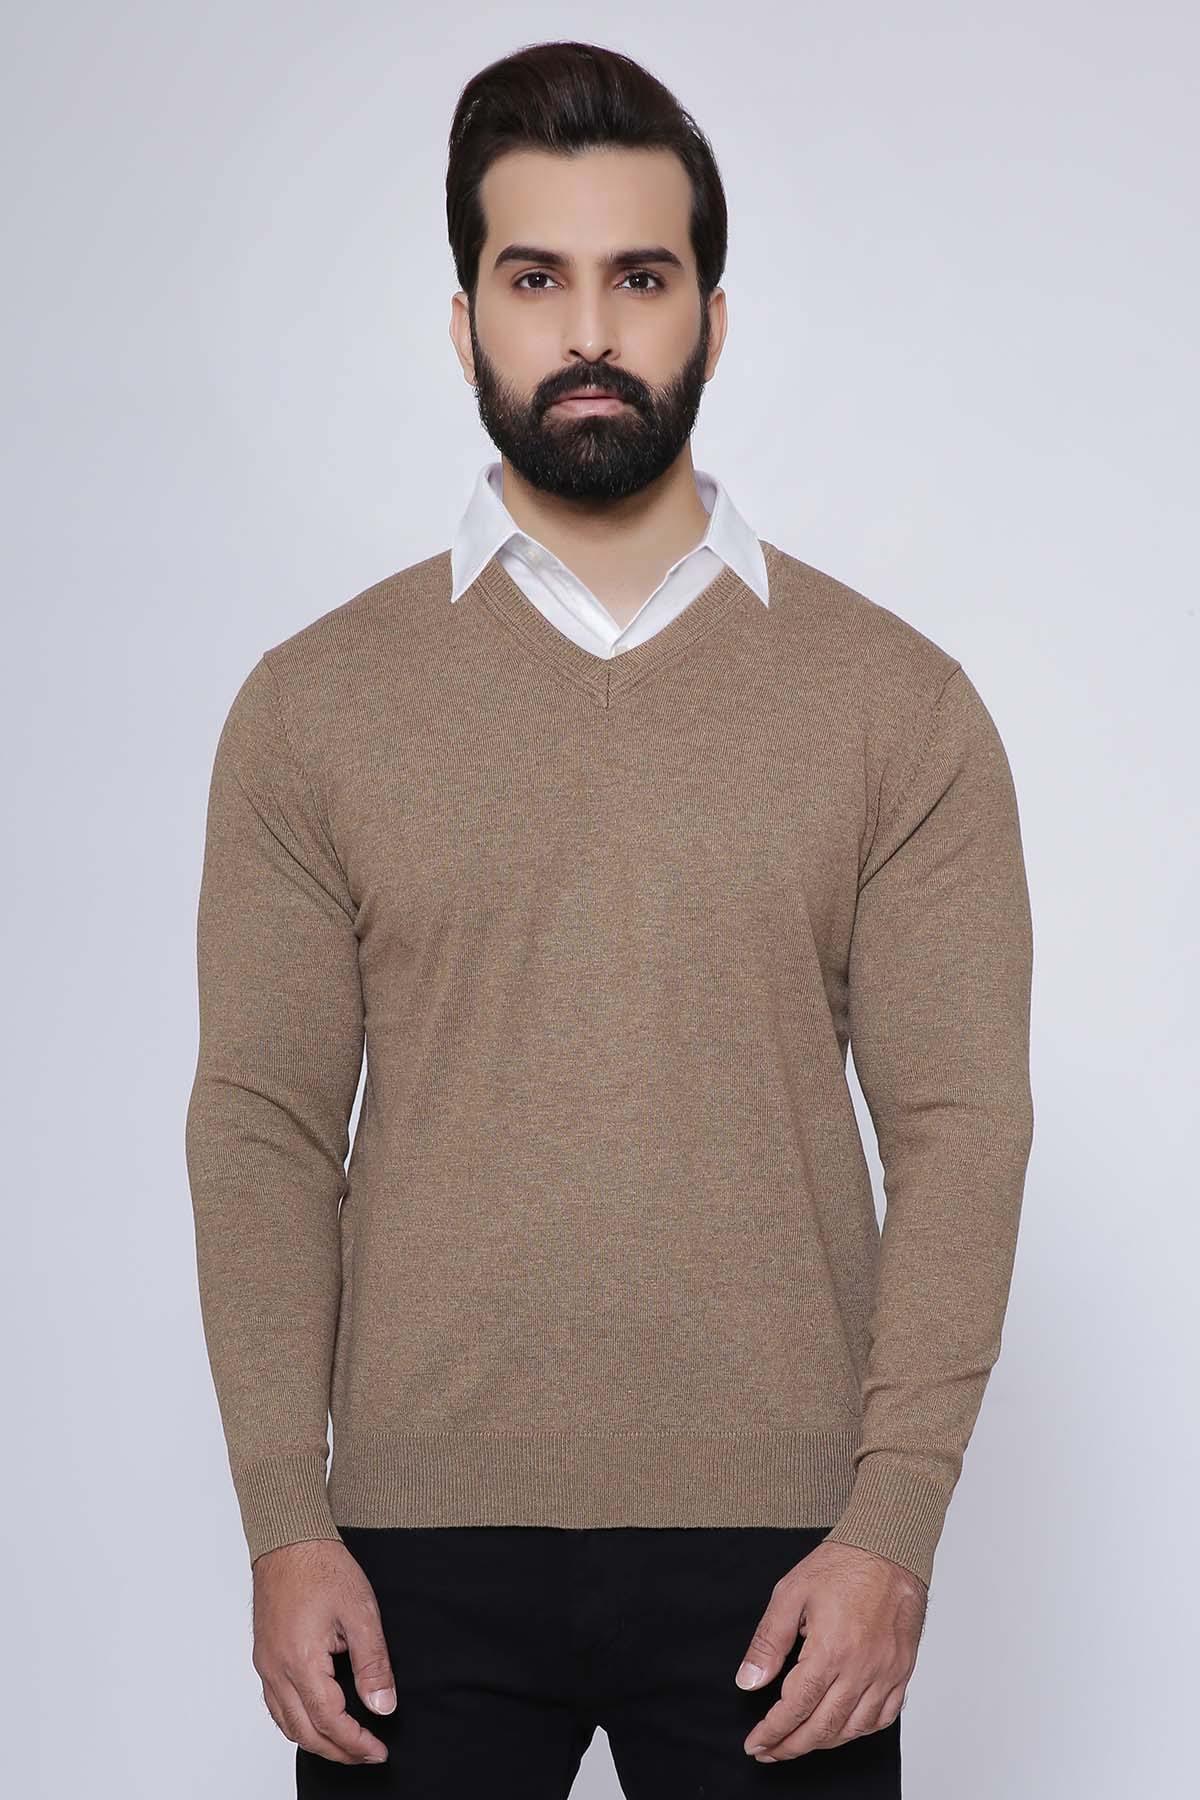 SWEATER V NECK FULL SLEEVE LIGHT BROWN at Charcoal Clothing